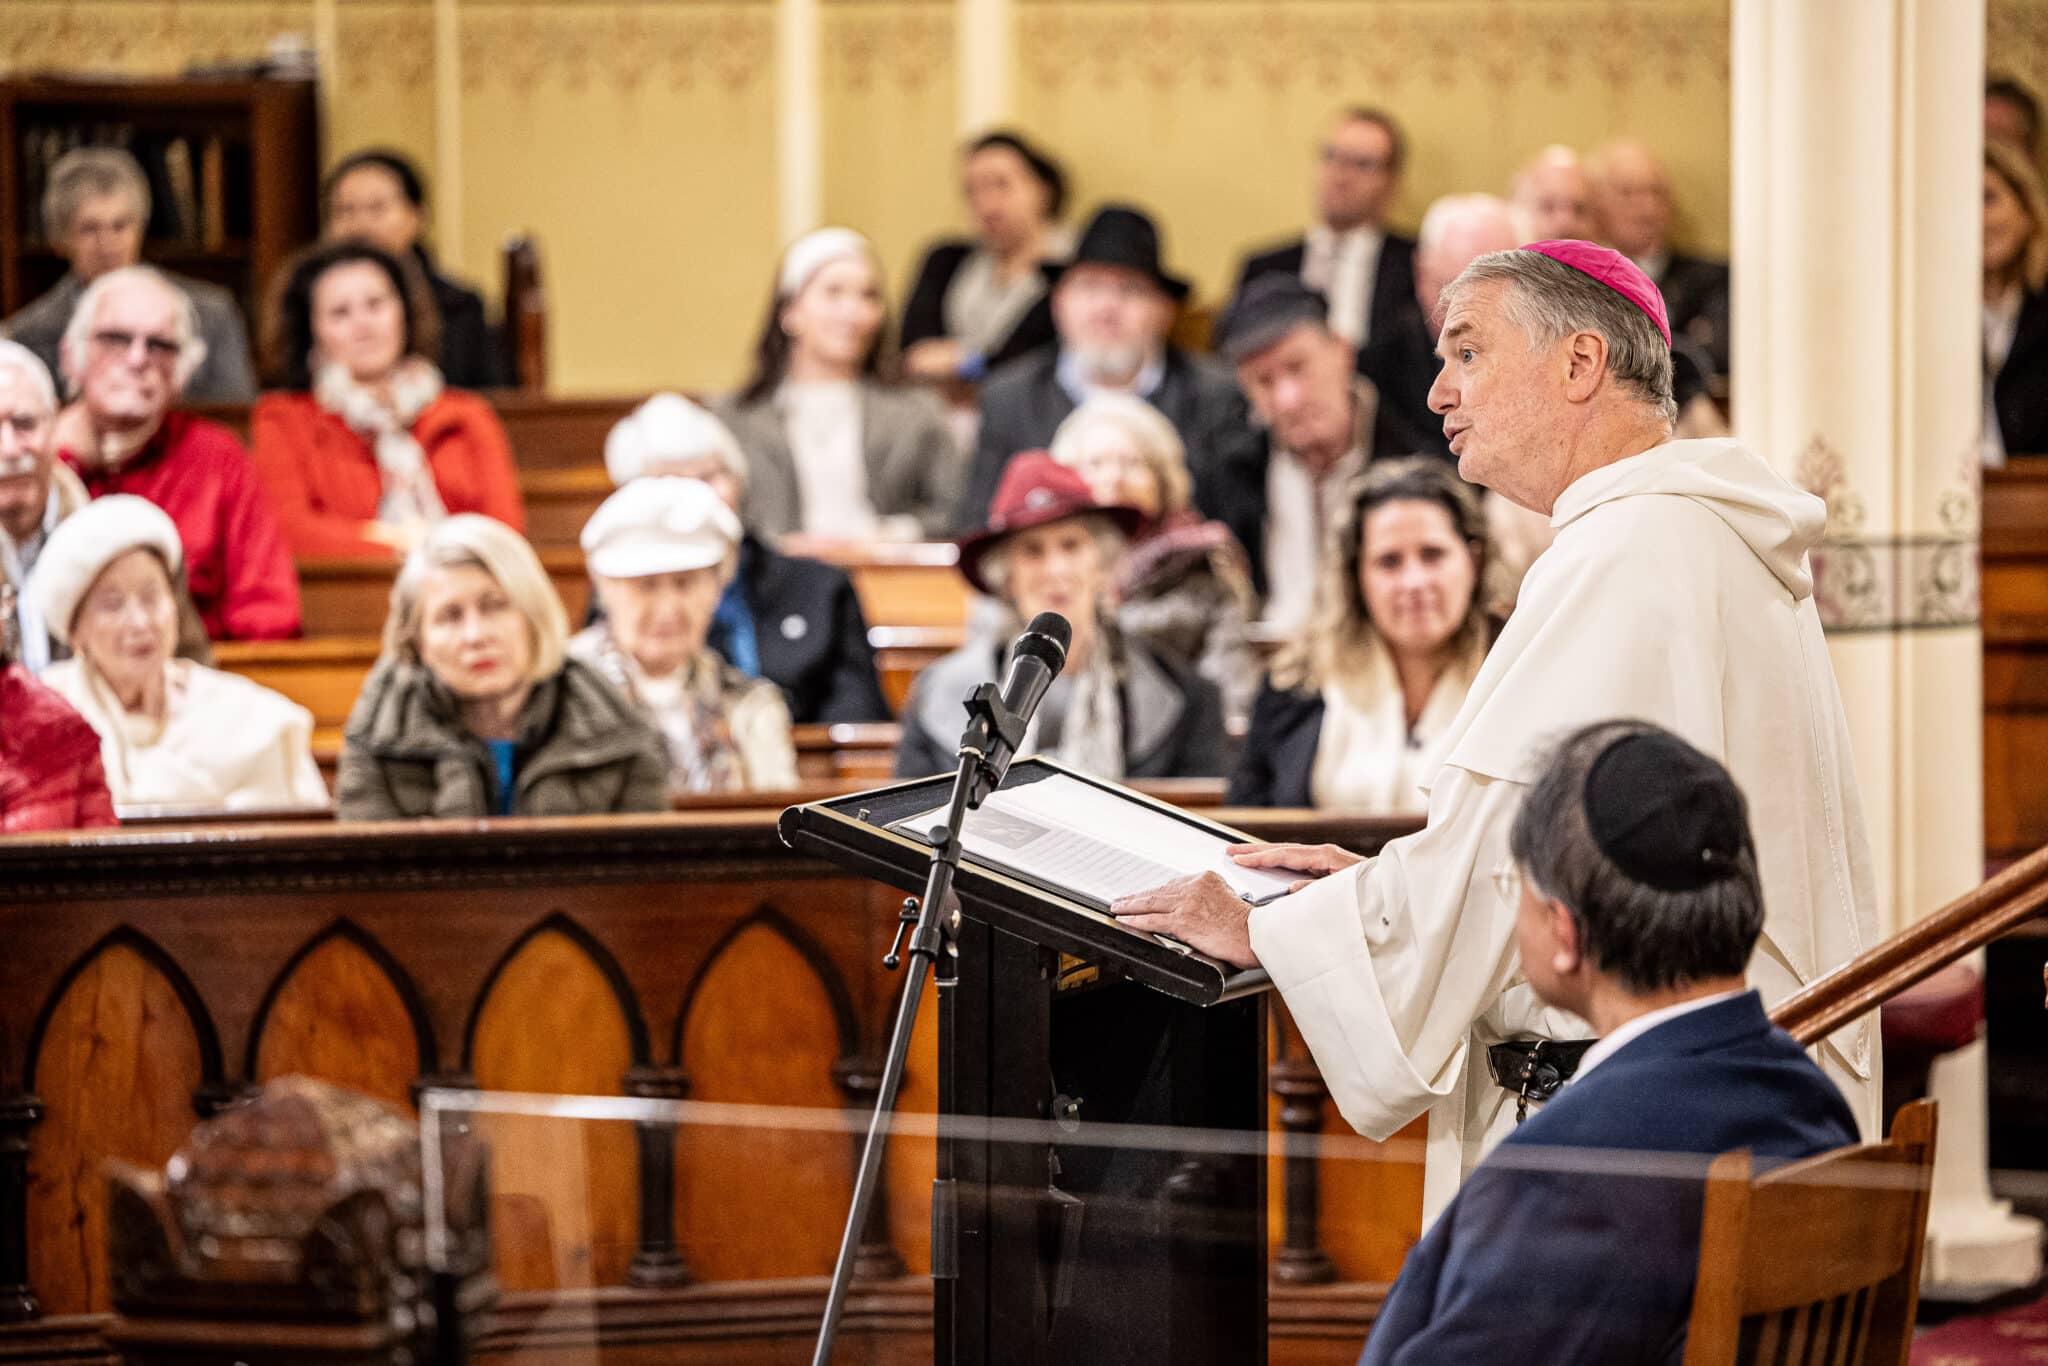 Christians and Jews - The Catholic weekly